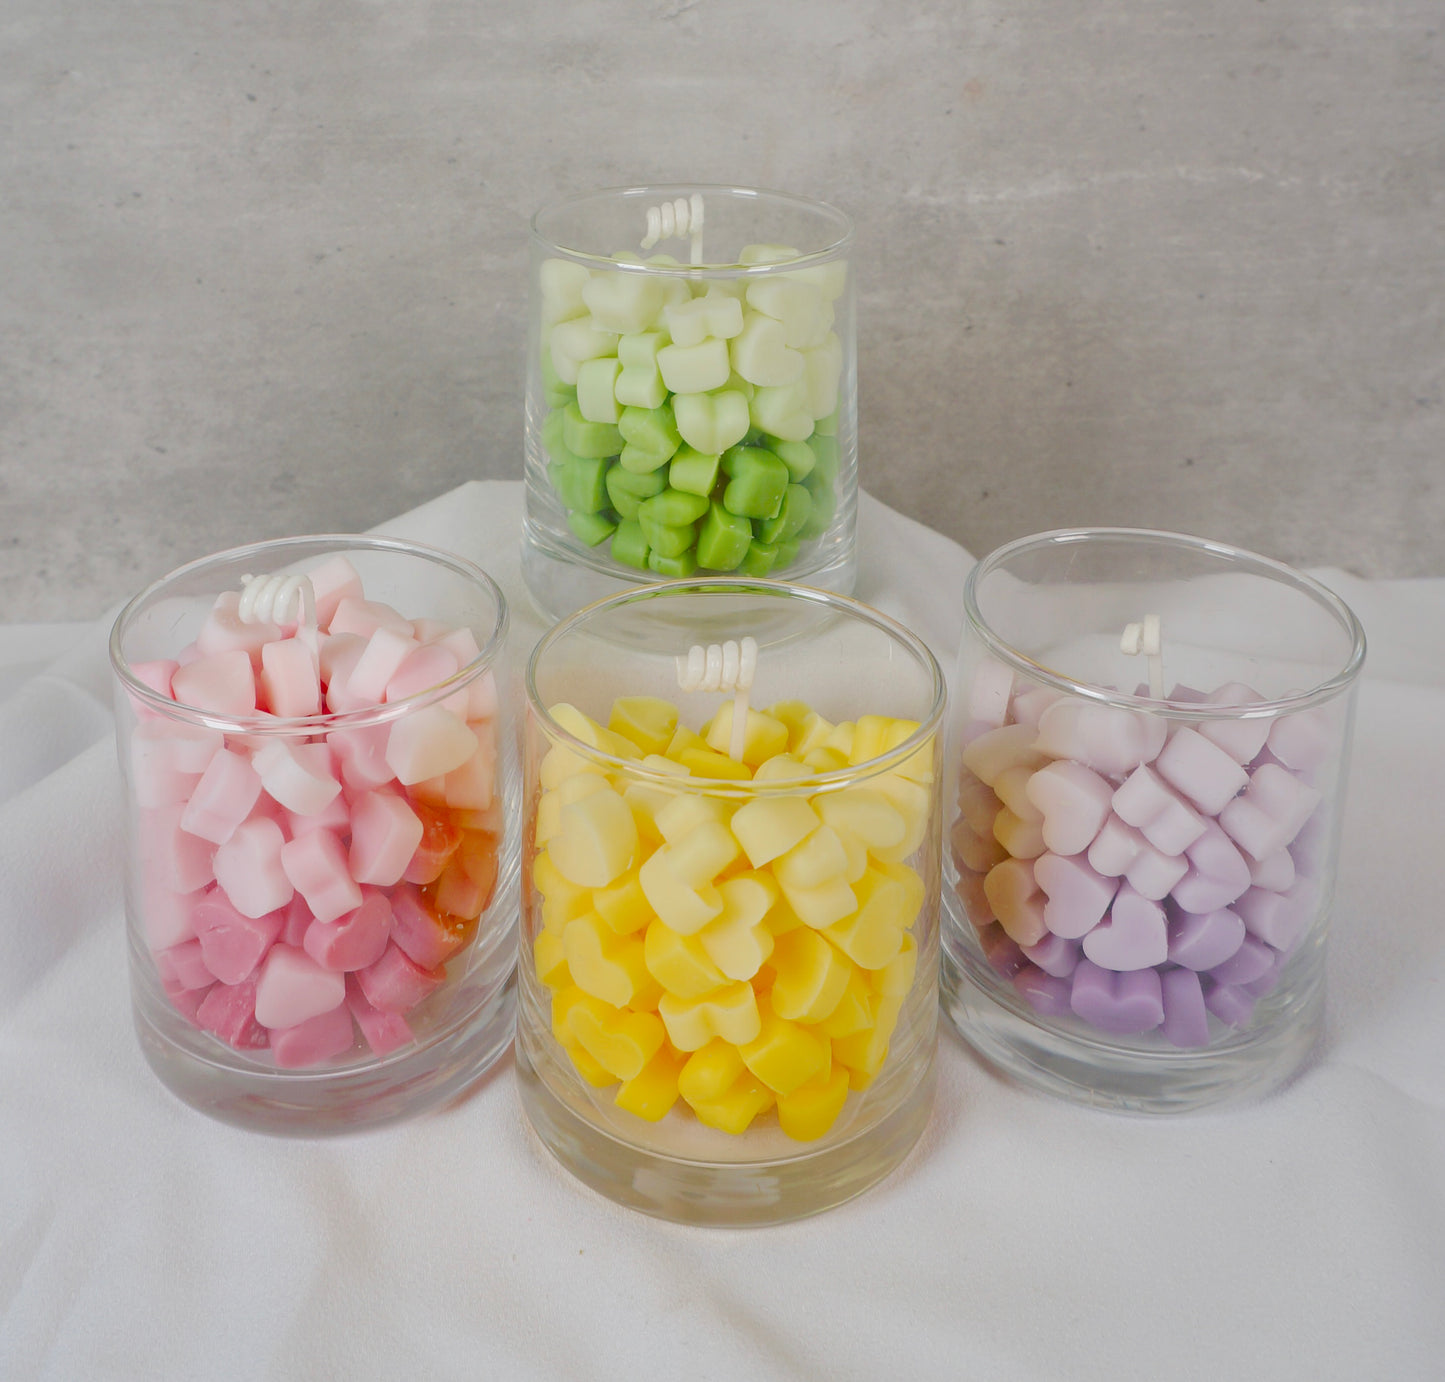 Hearts candle | Candy Hearts Candle| Conversation Hearts candle| Love candle| Valentines day candle | soy candle | gifts